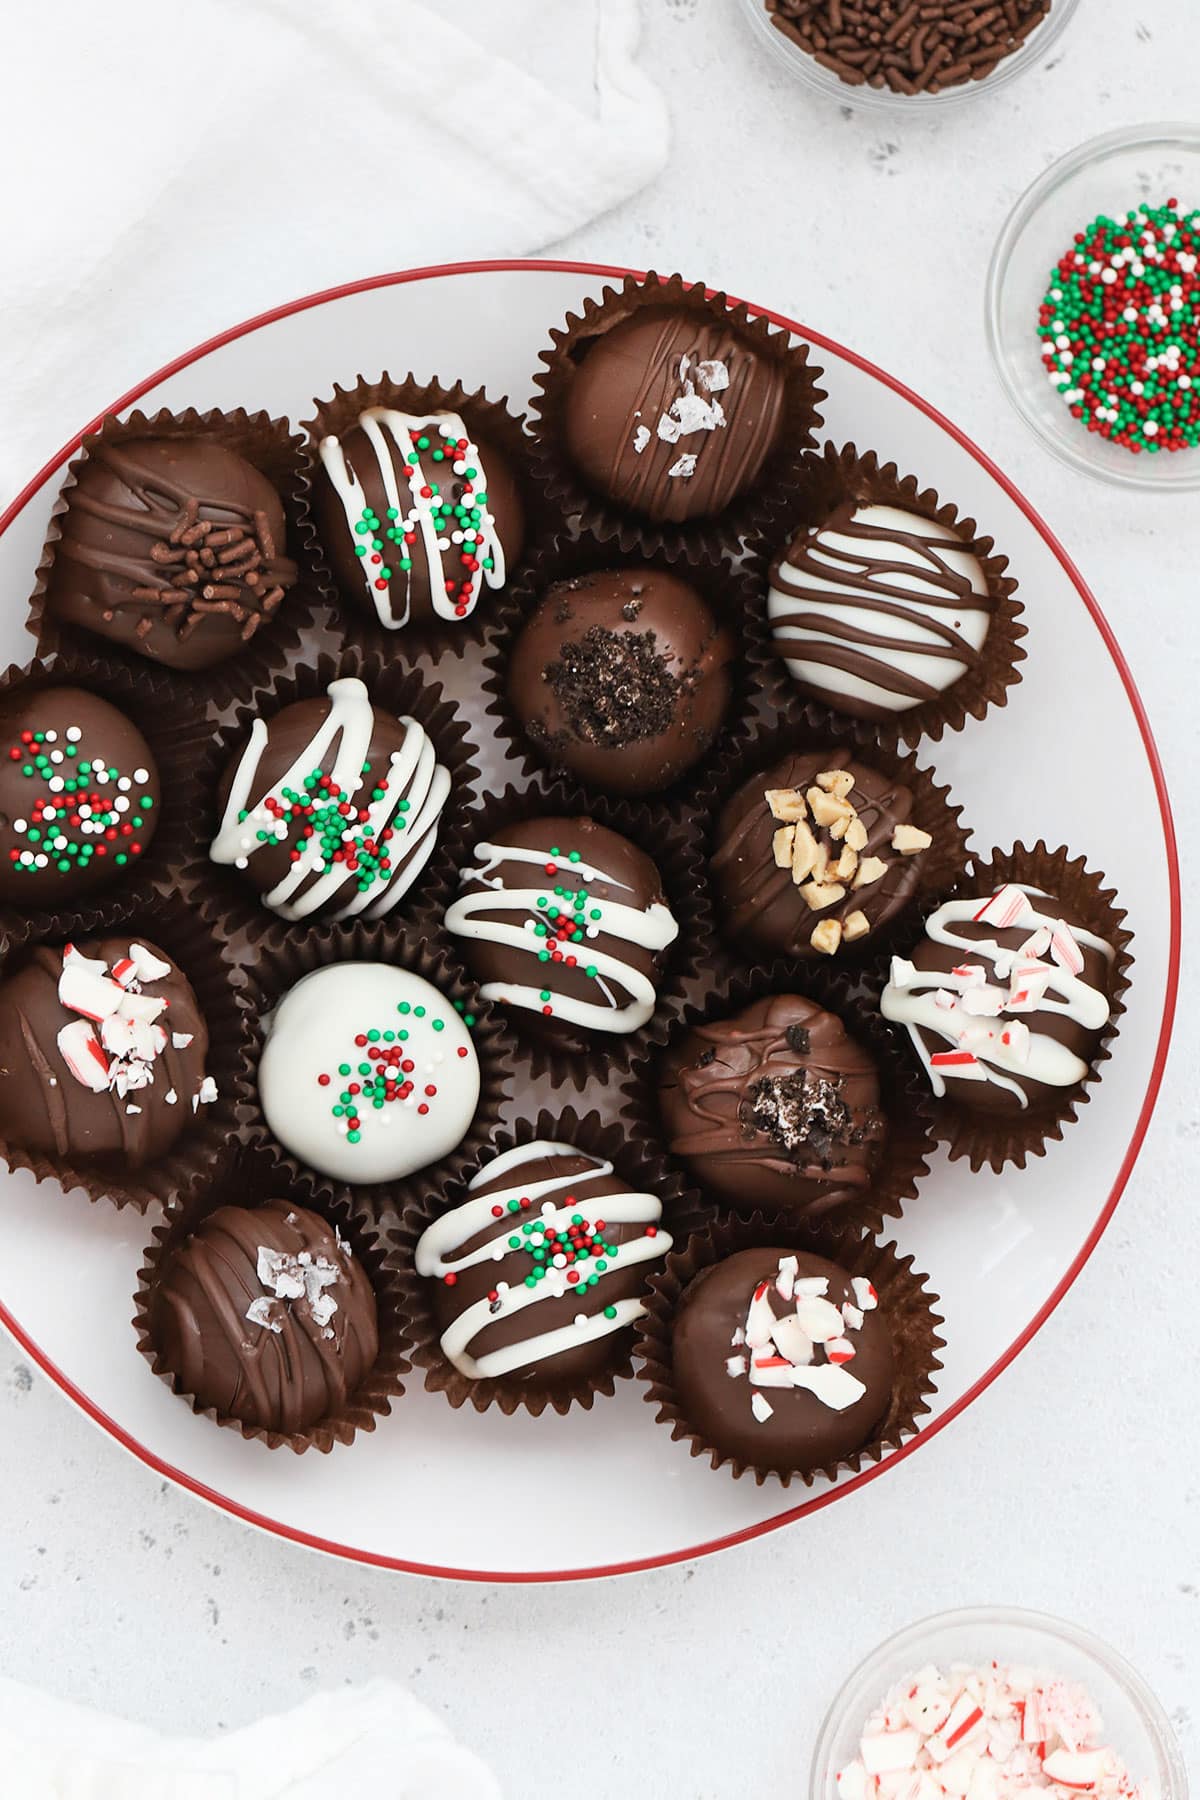 Gluten-free Oreo truffles decorated with different toppings on a white plate with a red rim